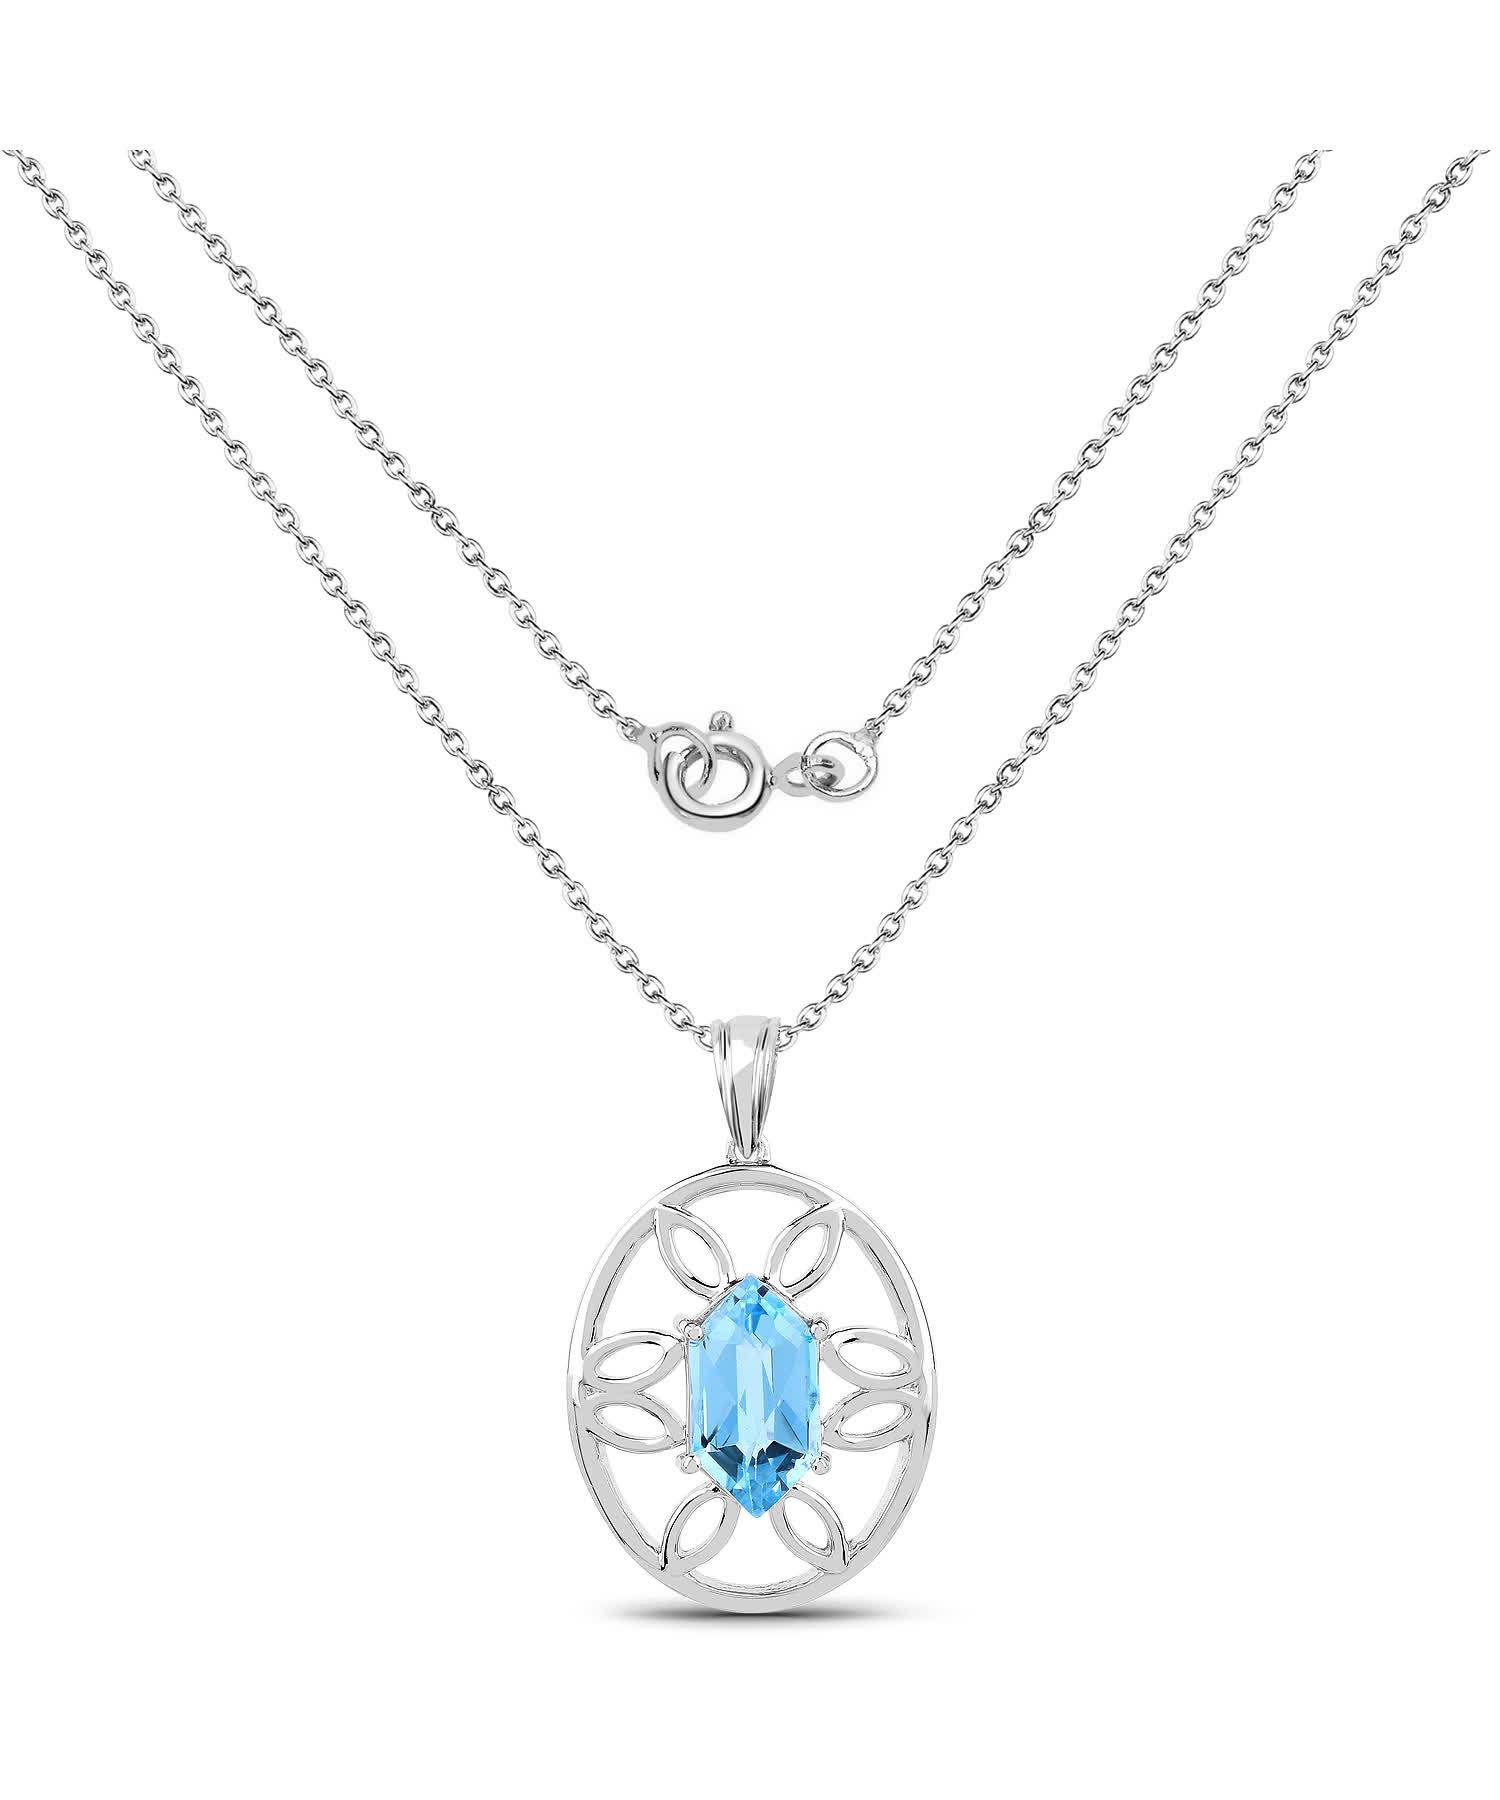 6.17ctw Natural Swiss Blue Topaz Rhodium Plated 925 Sterling Silver Oval Pendant With Chain View 2